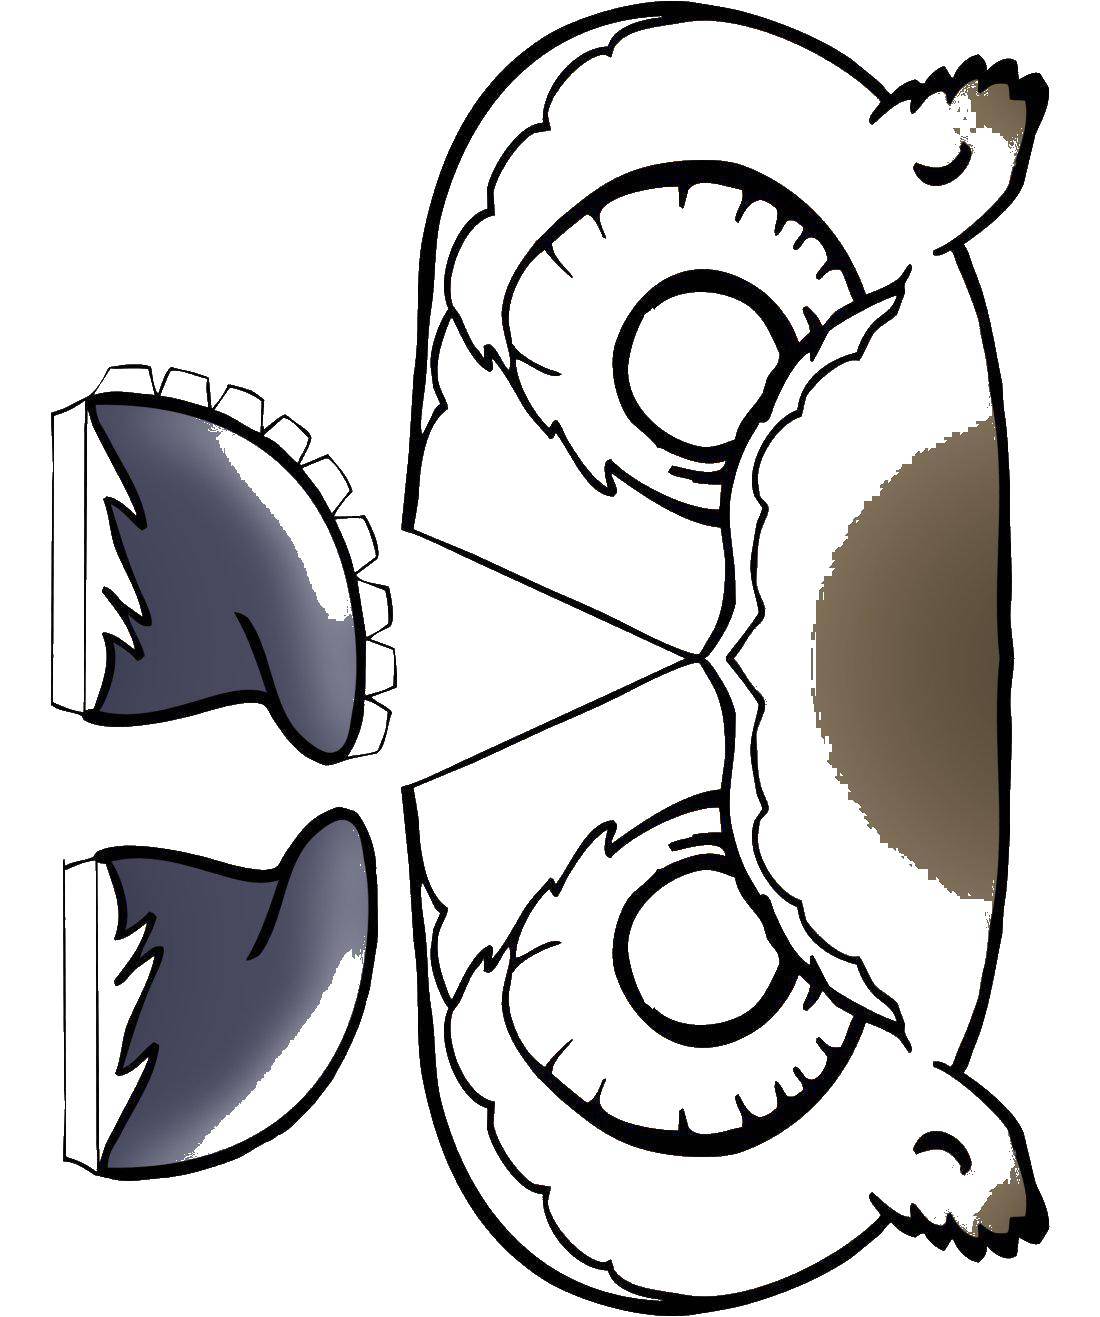 Coloring Mask owl. Category Masks . Tags:  mask, owl.